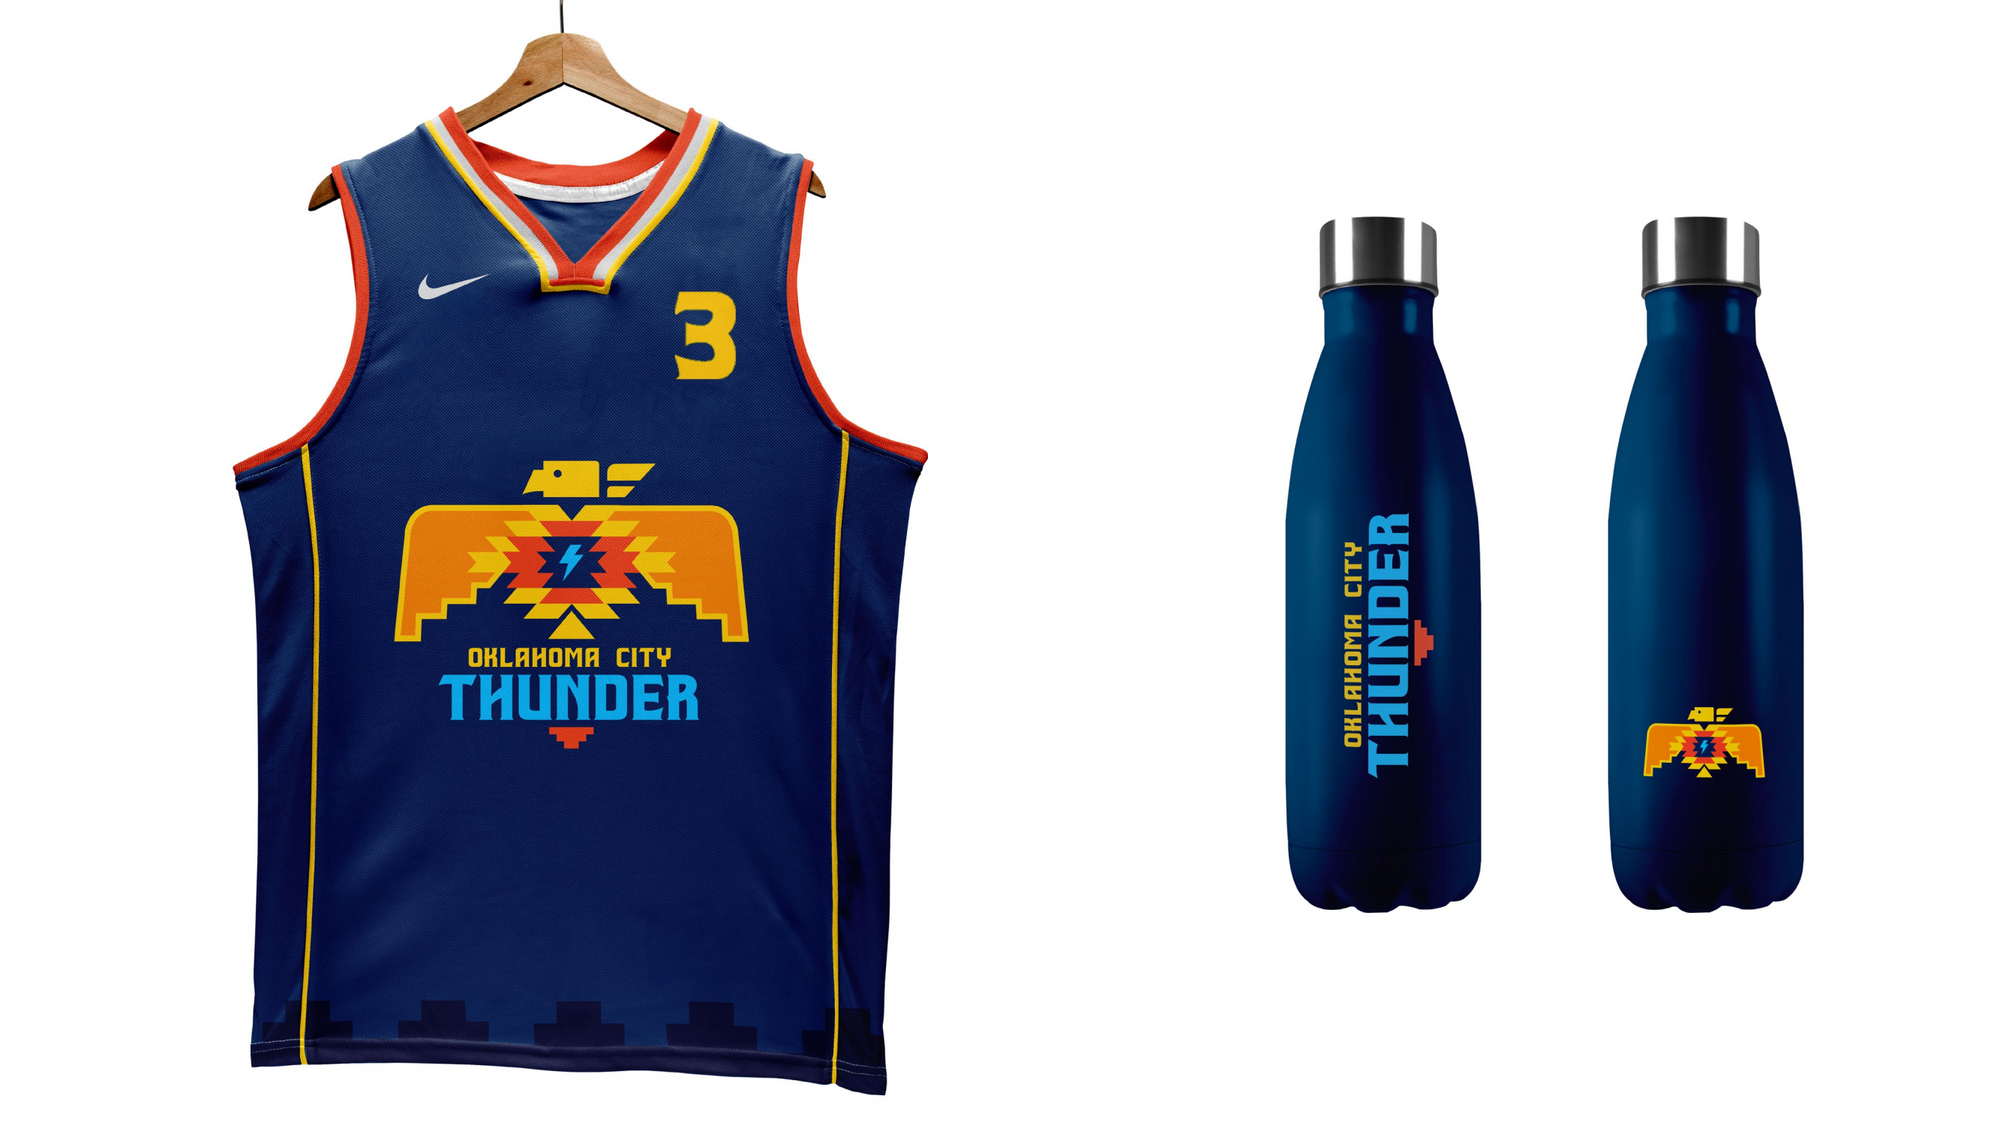 OKC Thunder: Check out the new 'Statement' jersey